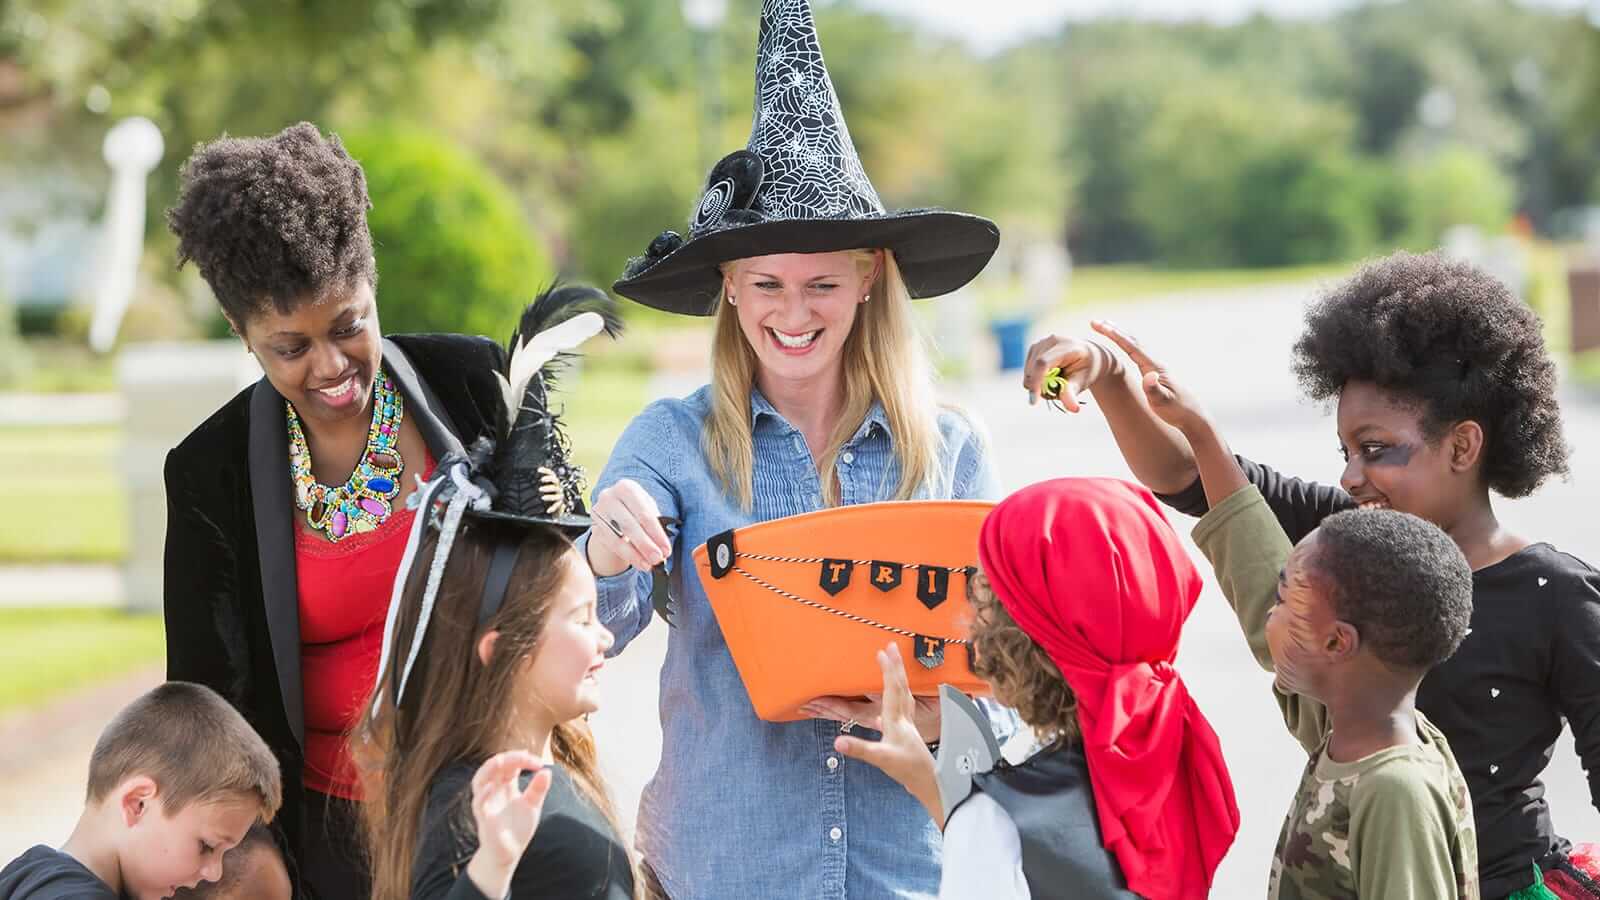 nixplay blog halloween celebrations picture perfect ways to celebrate halloween